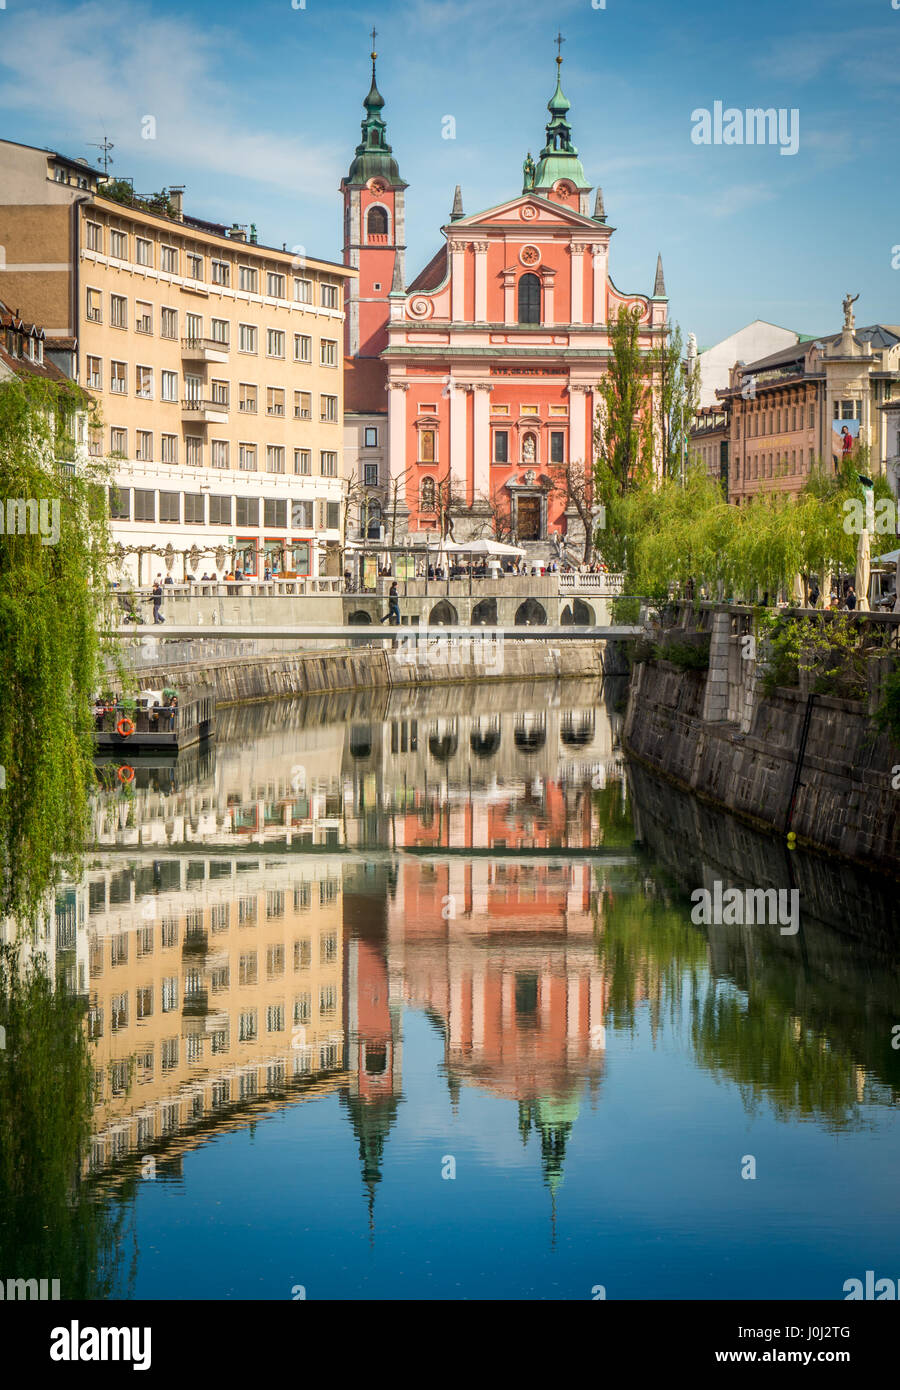 Ljubljana Old Town by Day. The river creates a beautiful reflection of the Franciscan Church Stock Photo